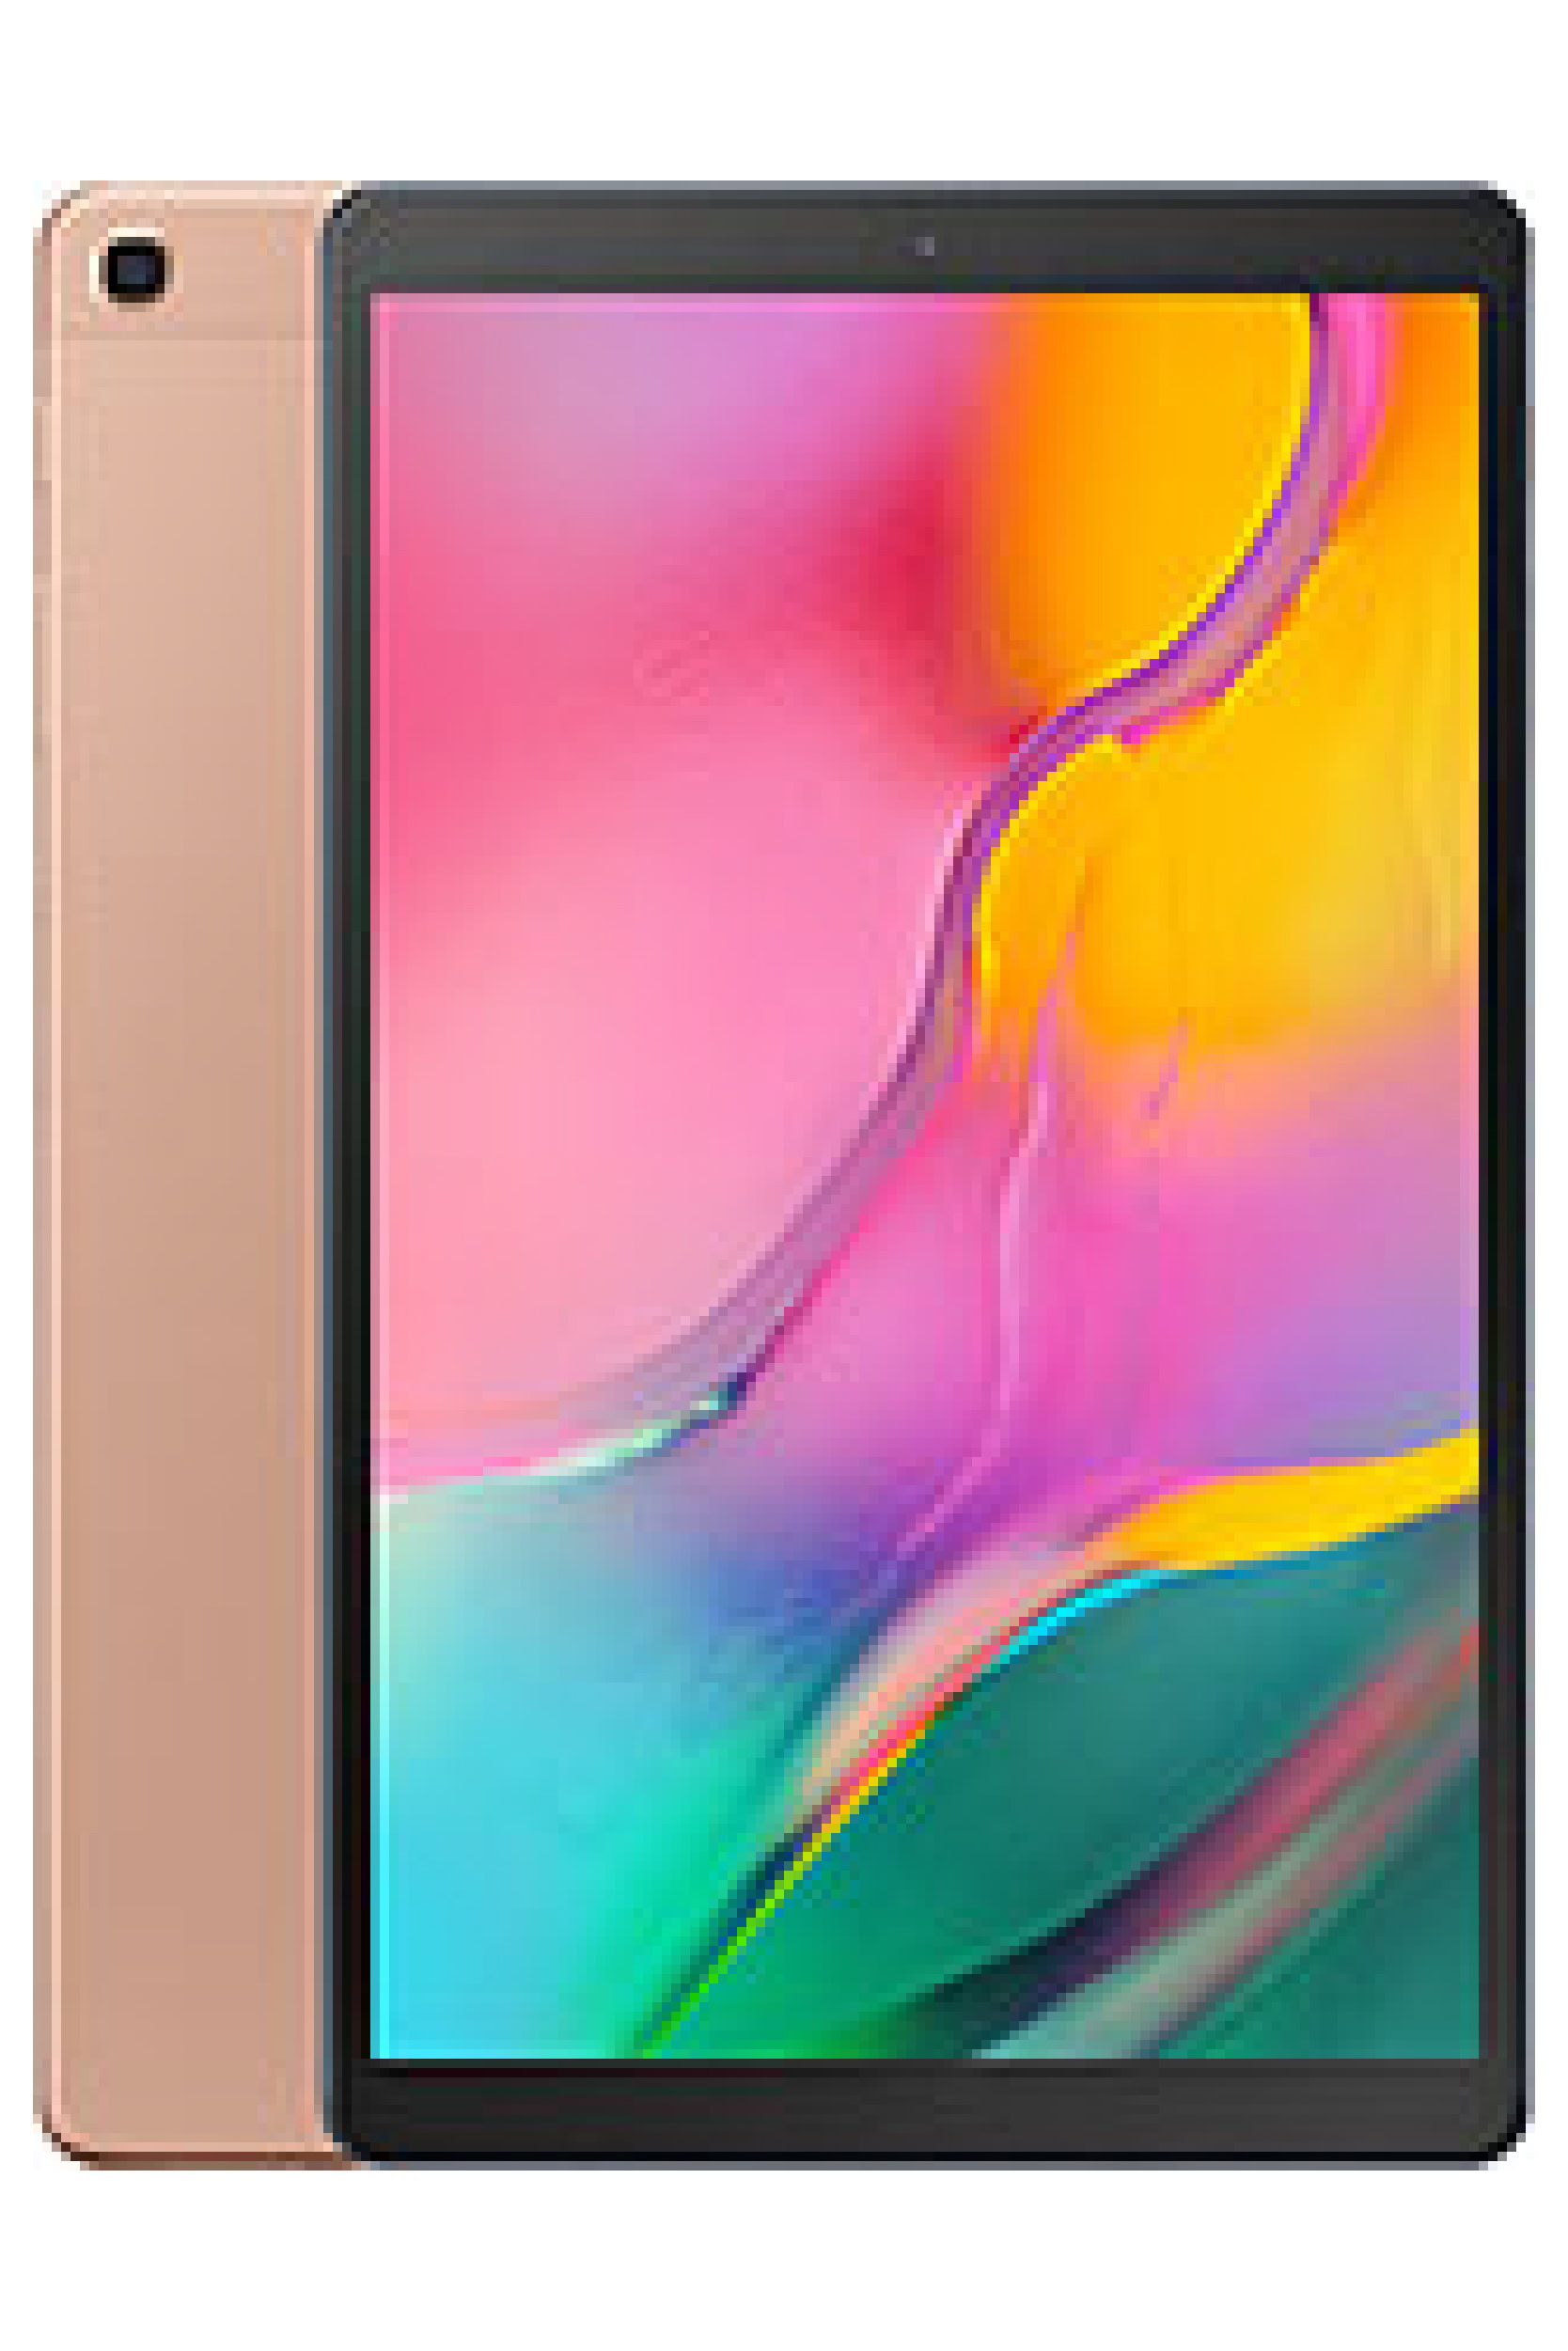 Samsung Galaxy Tab A 10 1 2019 Price In Pakistan Specs Daily Updated Propakistani